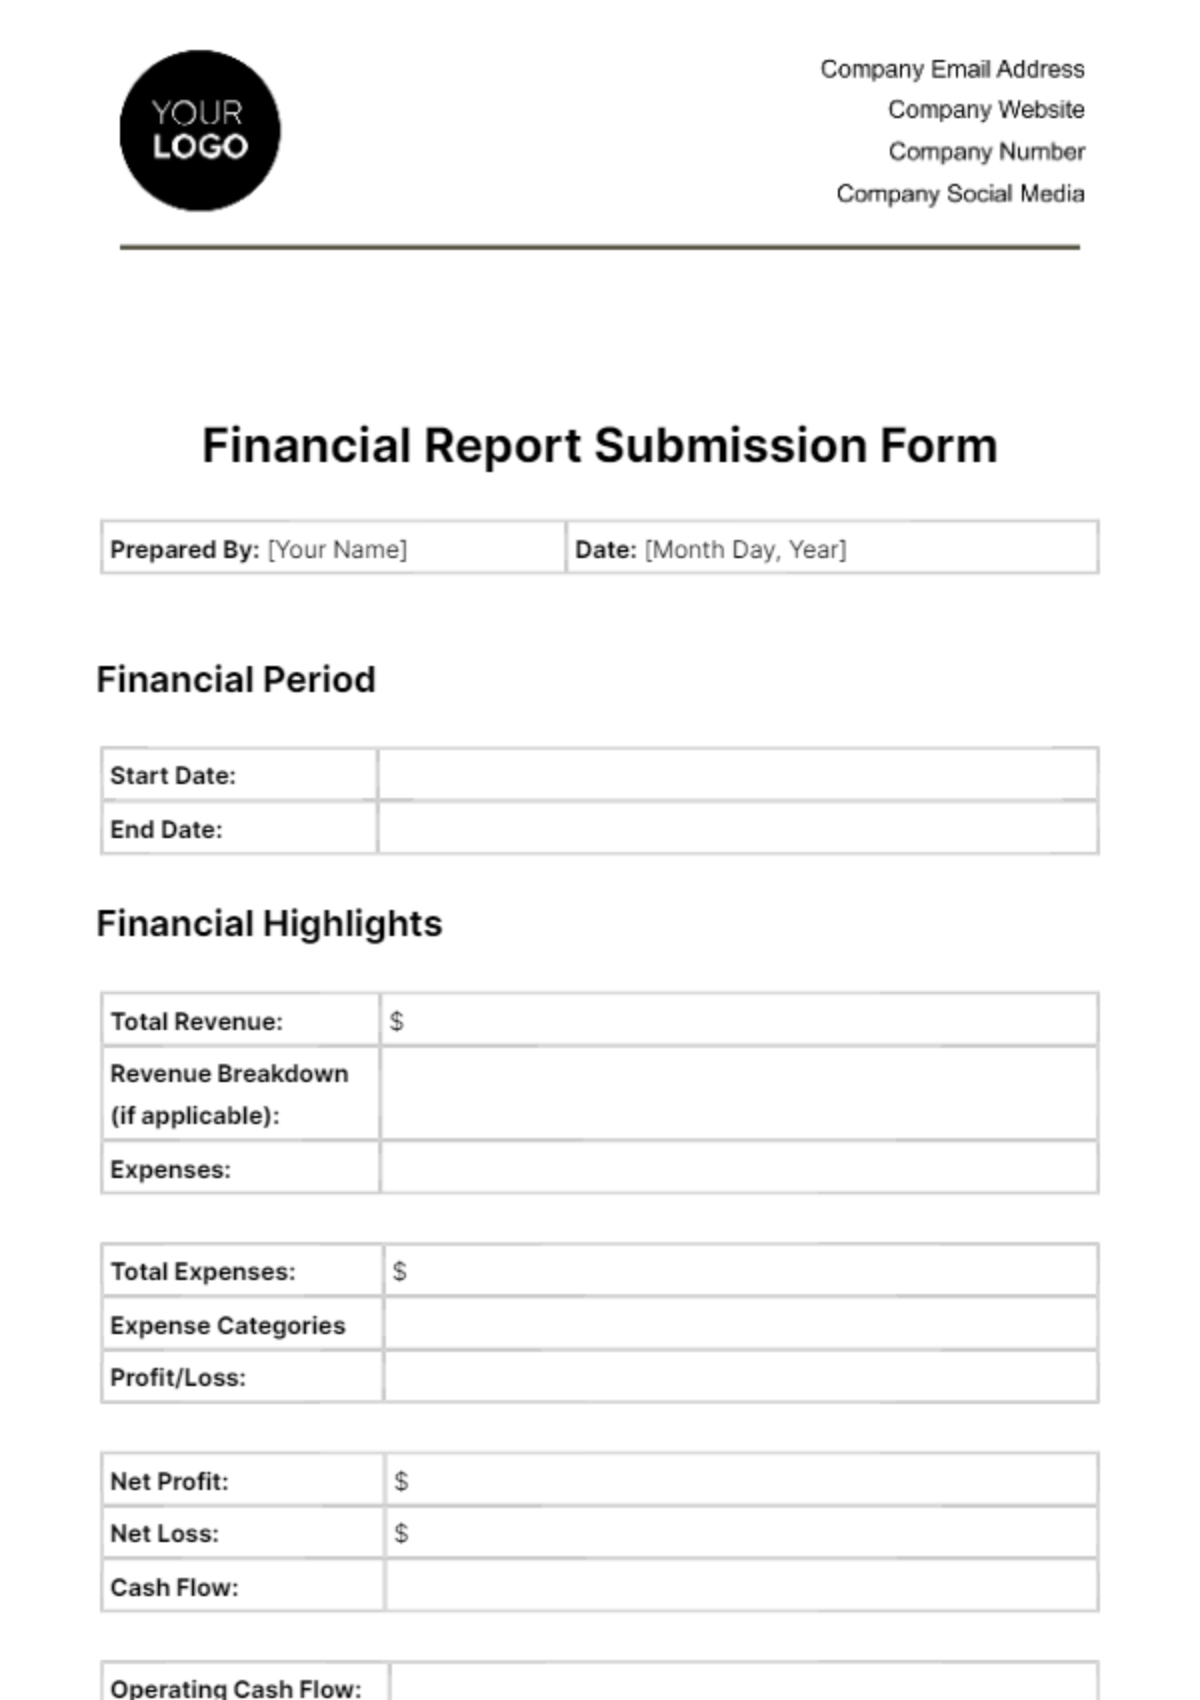 Financial Report Submission Form Template